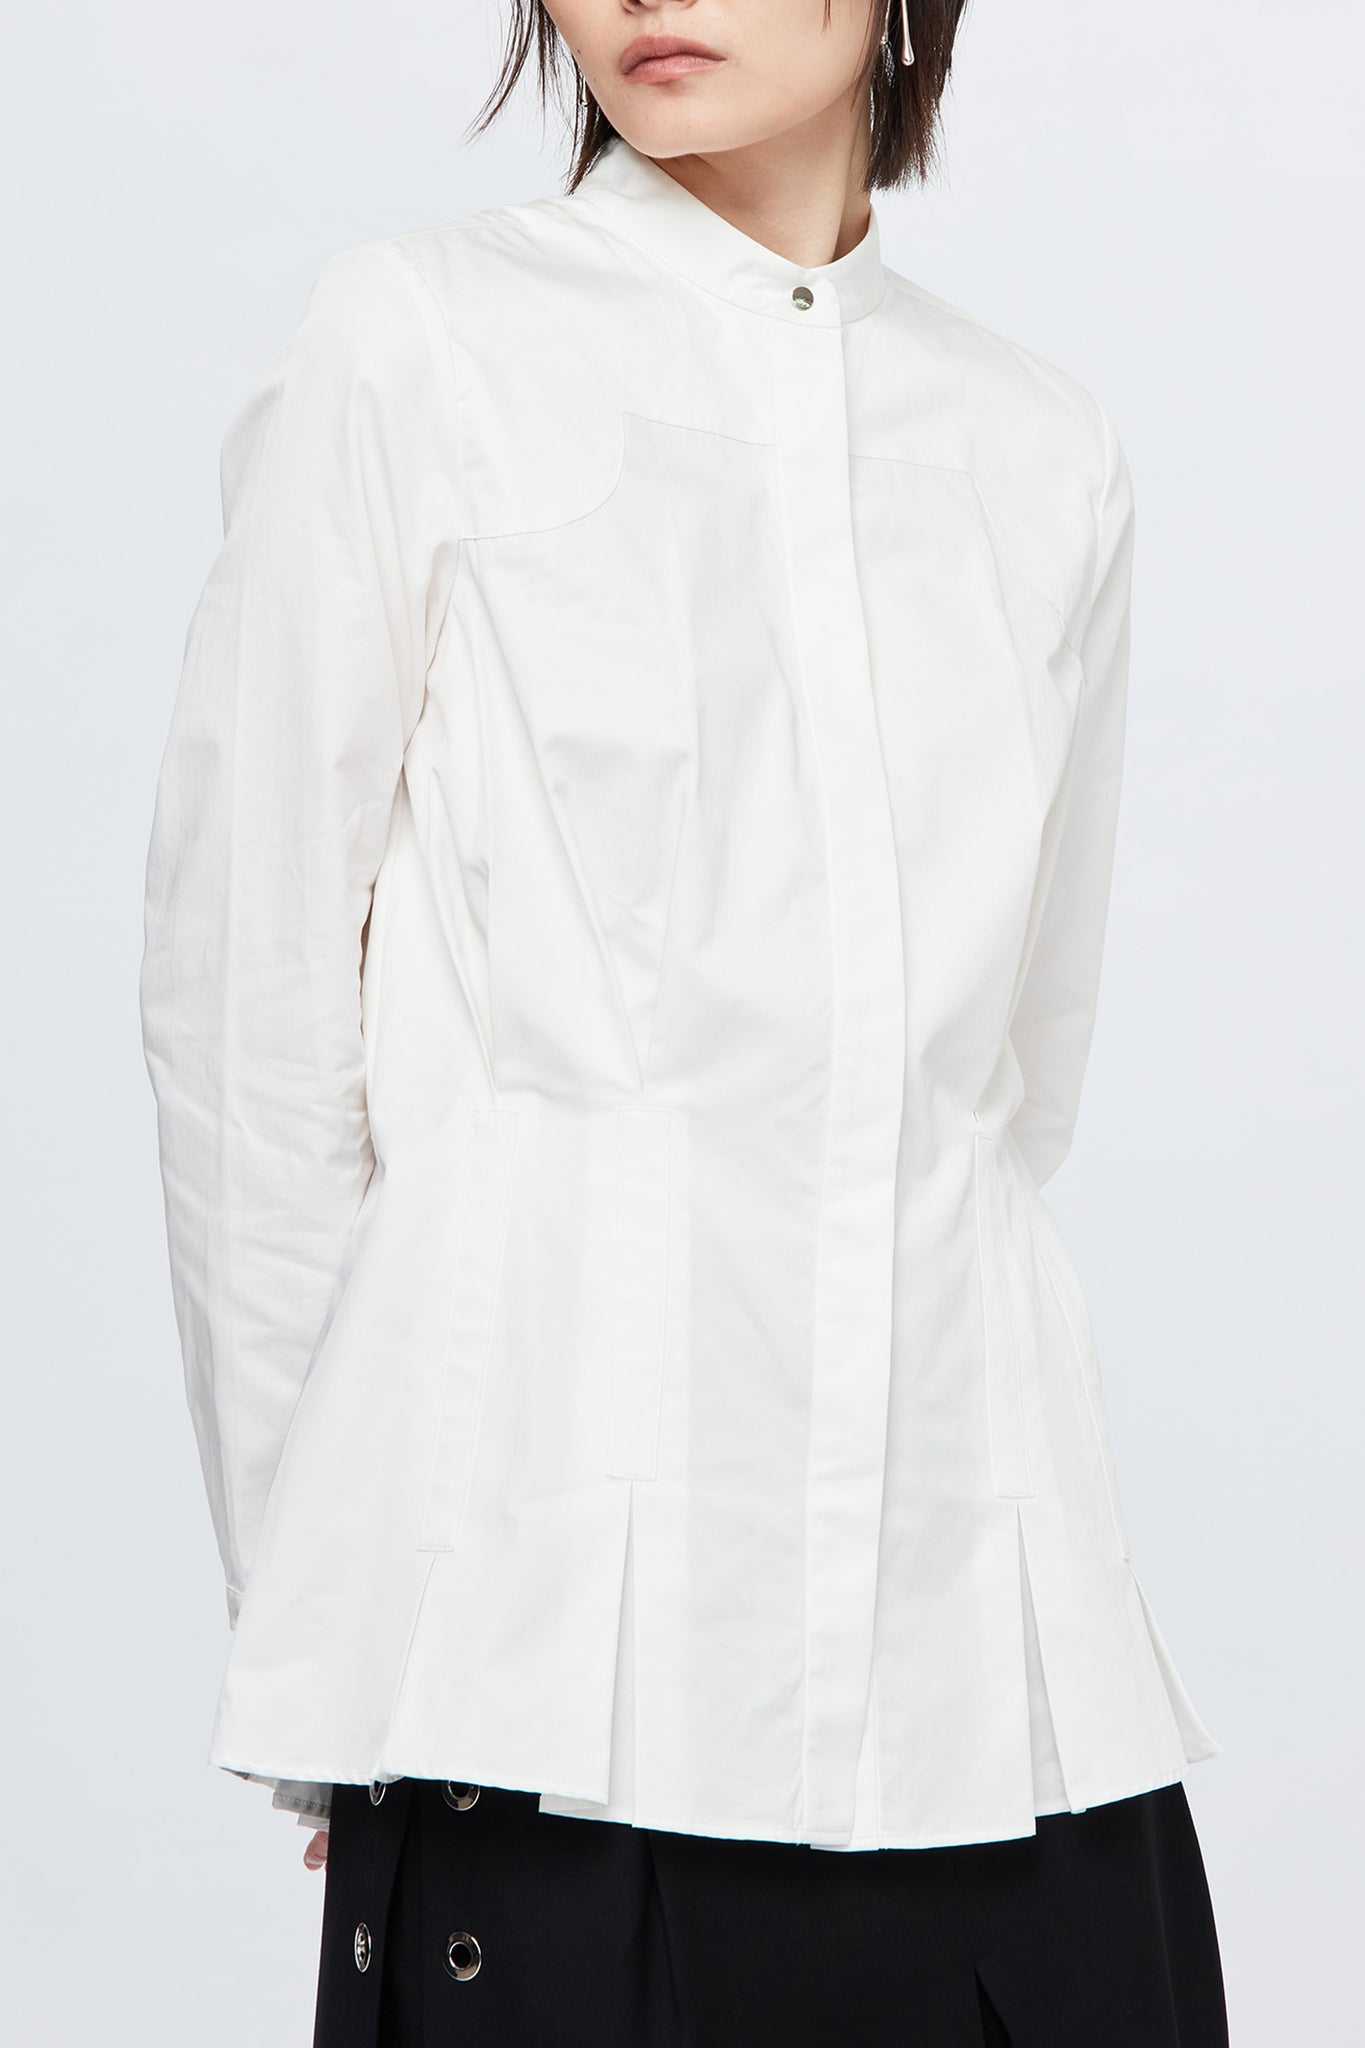 TARE Structural Shirt